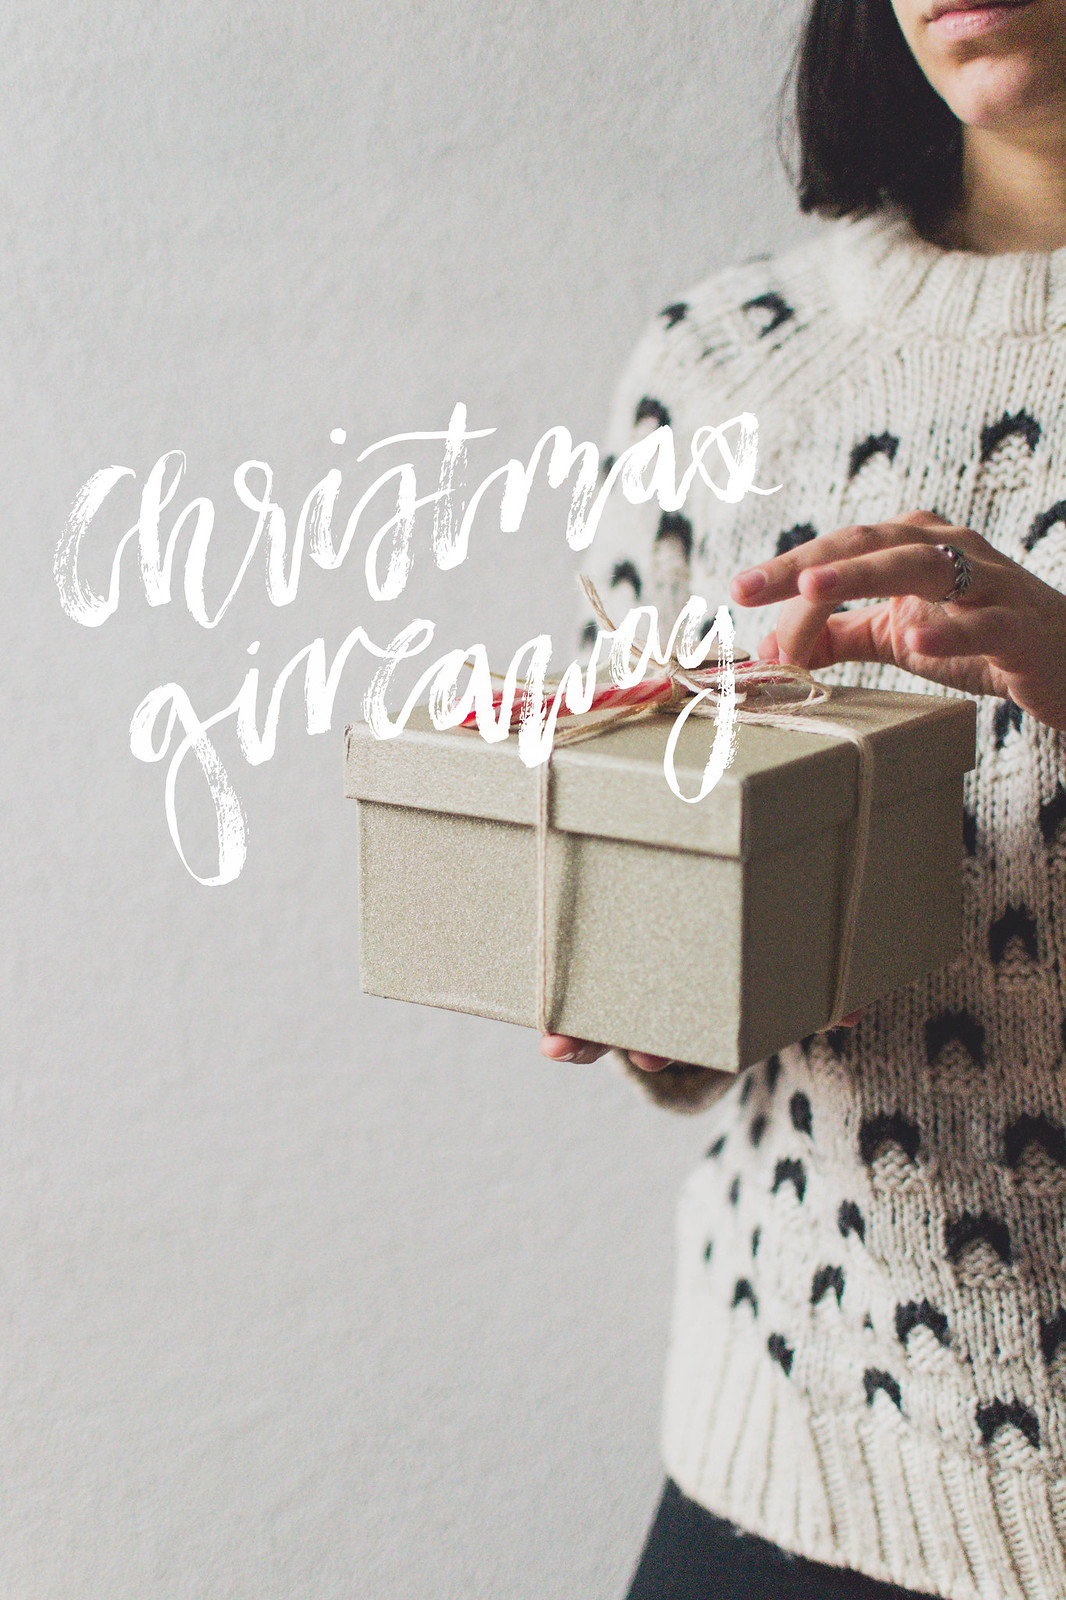 Enter my Christmas giveaway for a chance to win some Christmassy bits and bobs!